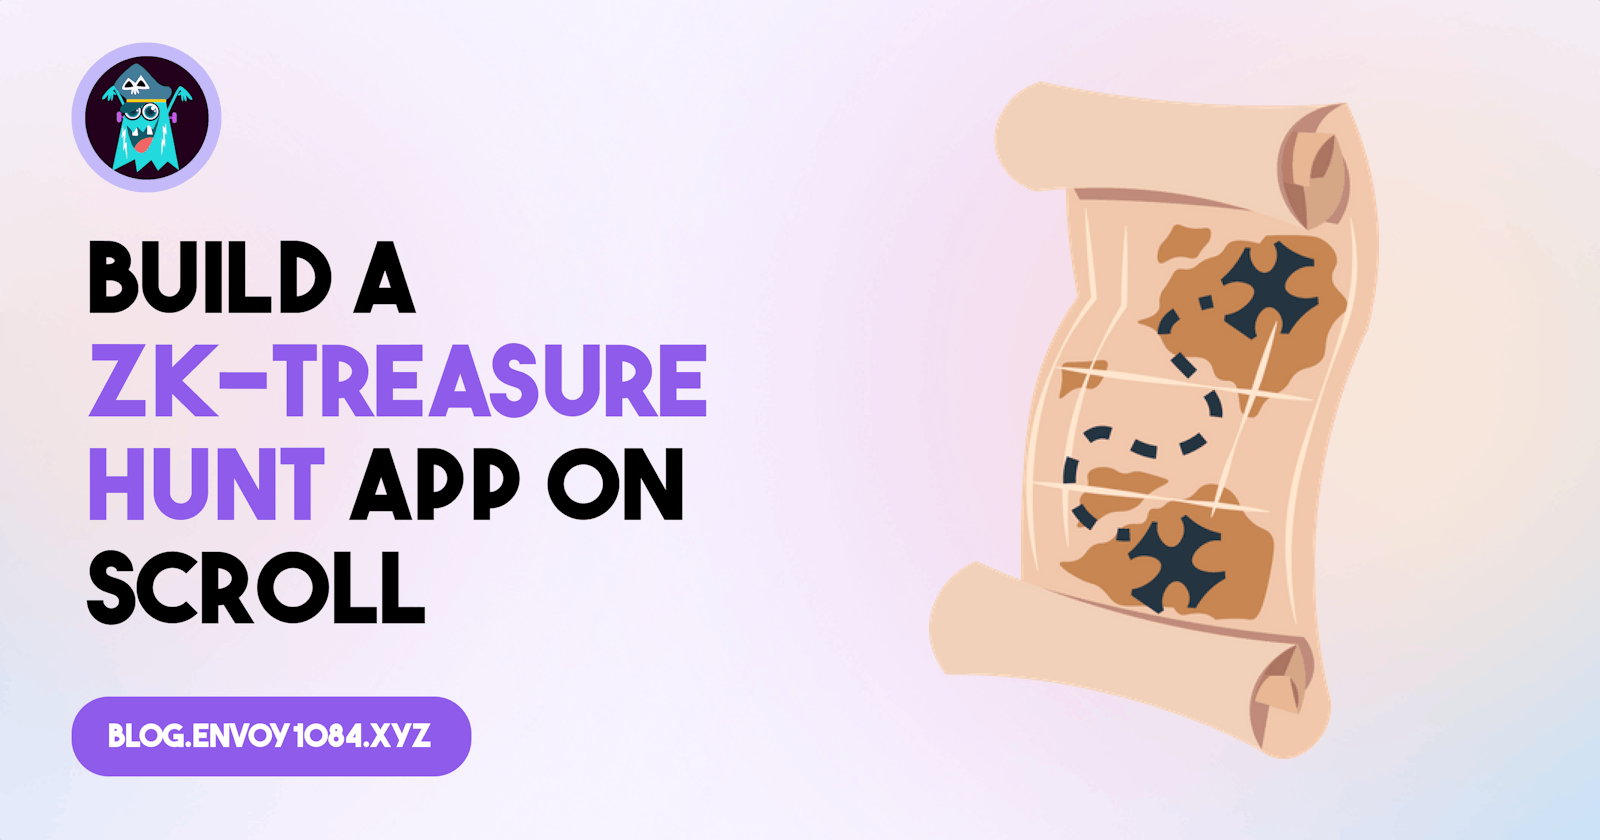 Learn to Build a ZK Treasure Hunt App and Master Noir Circuits on Scroll